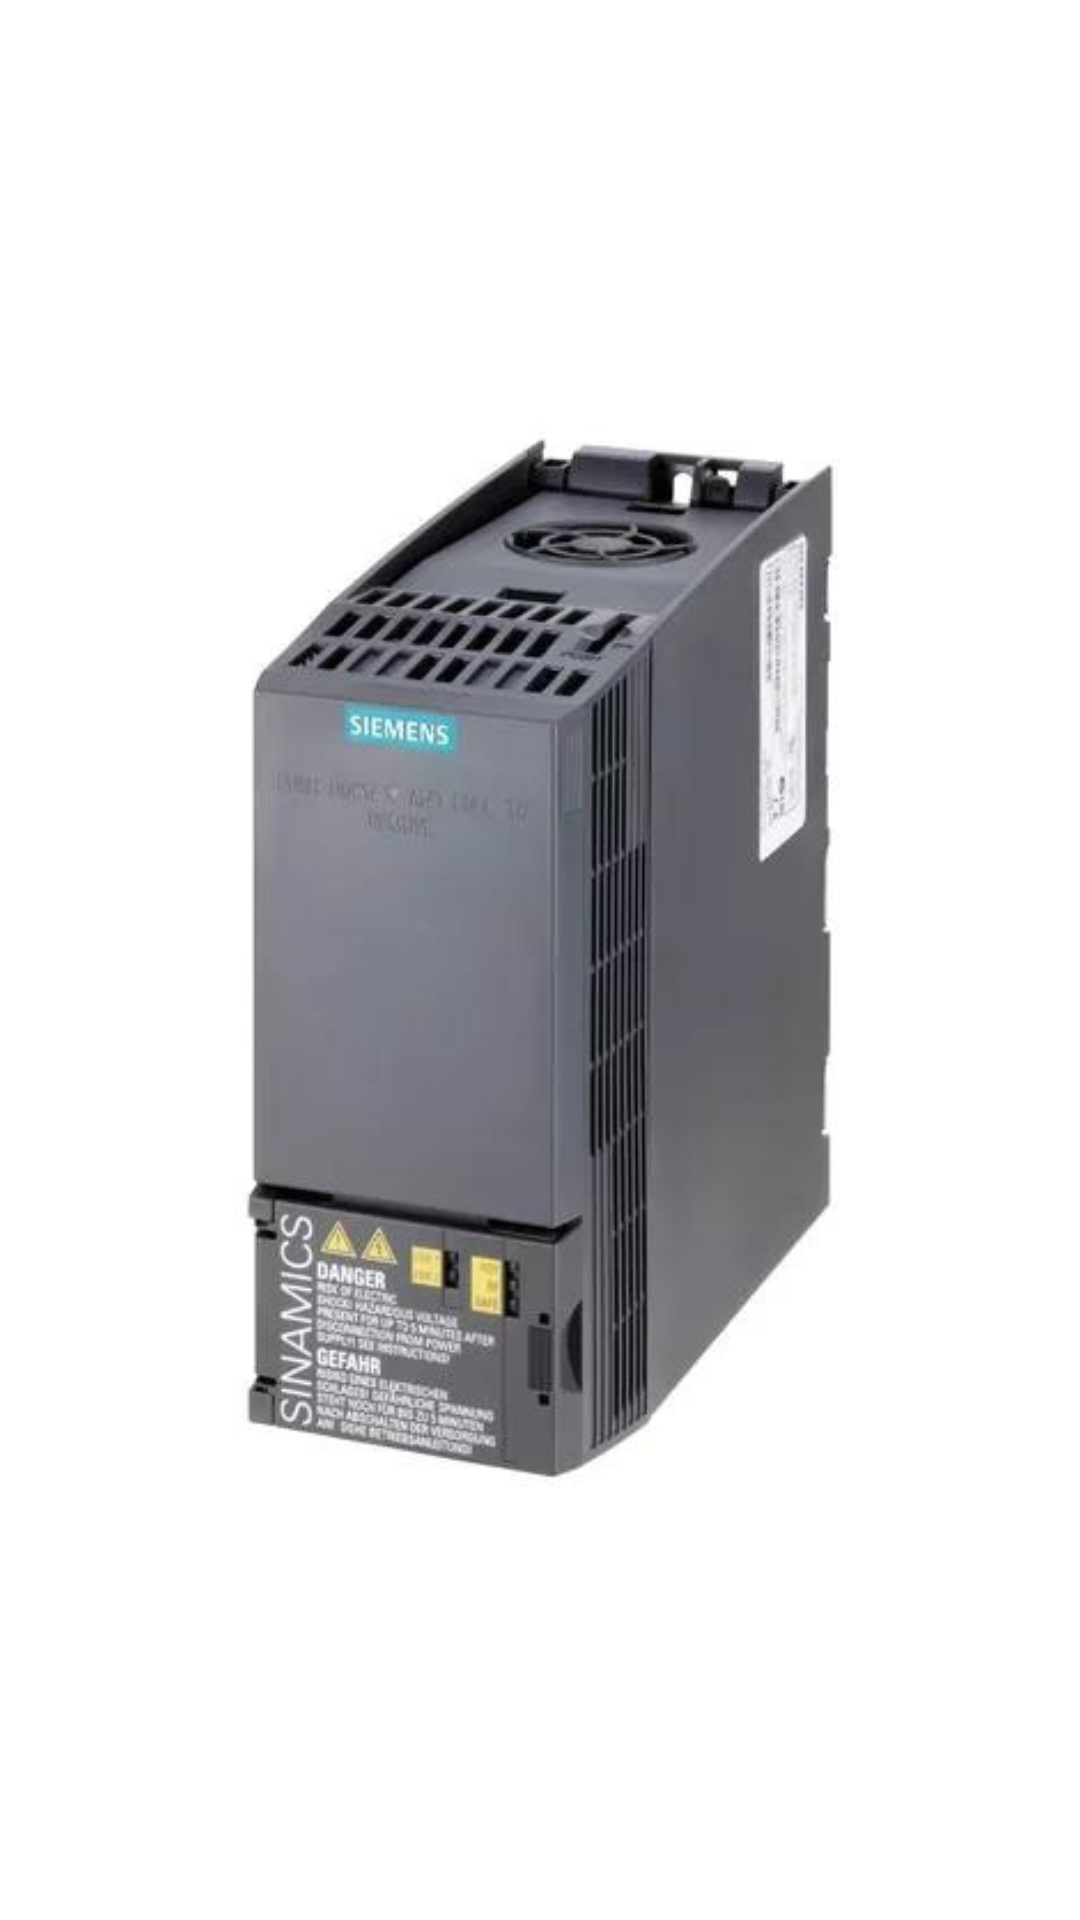 6SL3210-1KE15-8UF2 Siemens SINAMICS G120C RATED POWER 2,2KW WITH 150% OVERLOAD FOR 3 SEC 3AC380-480V +10/-20% 47-63HZ UNFILTERED I/O-INTERFACE: 6DI, 2DO,1AI,1AO SAFE TORQUE OFF INTEGRATED FIELDBUS: PROFINET-PN PROTECTION: IP20